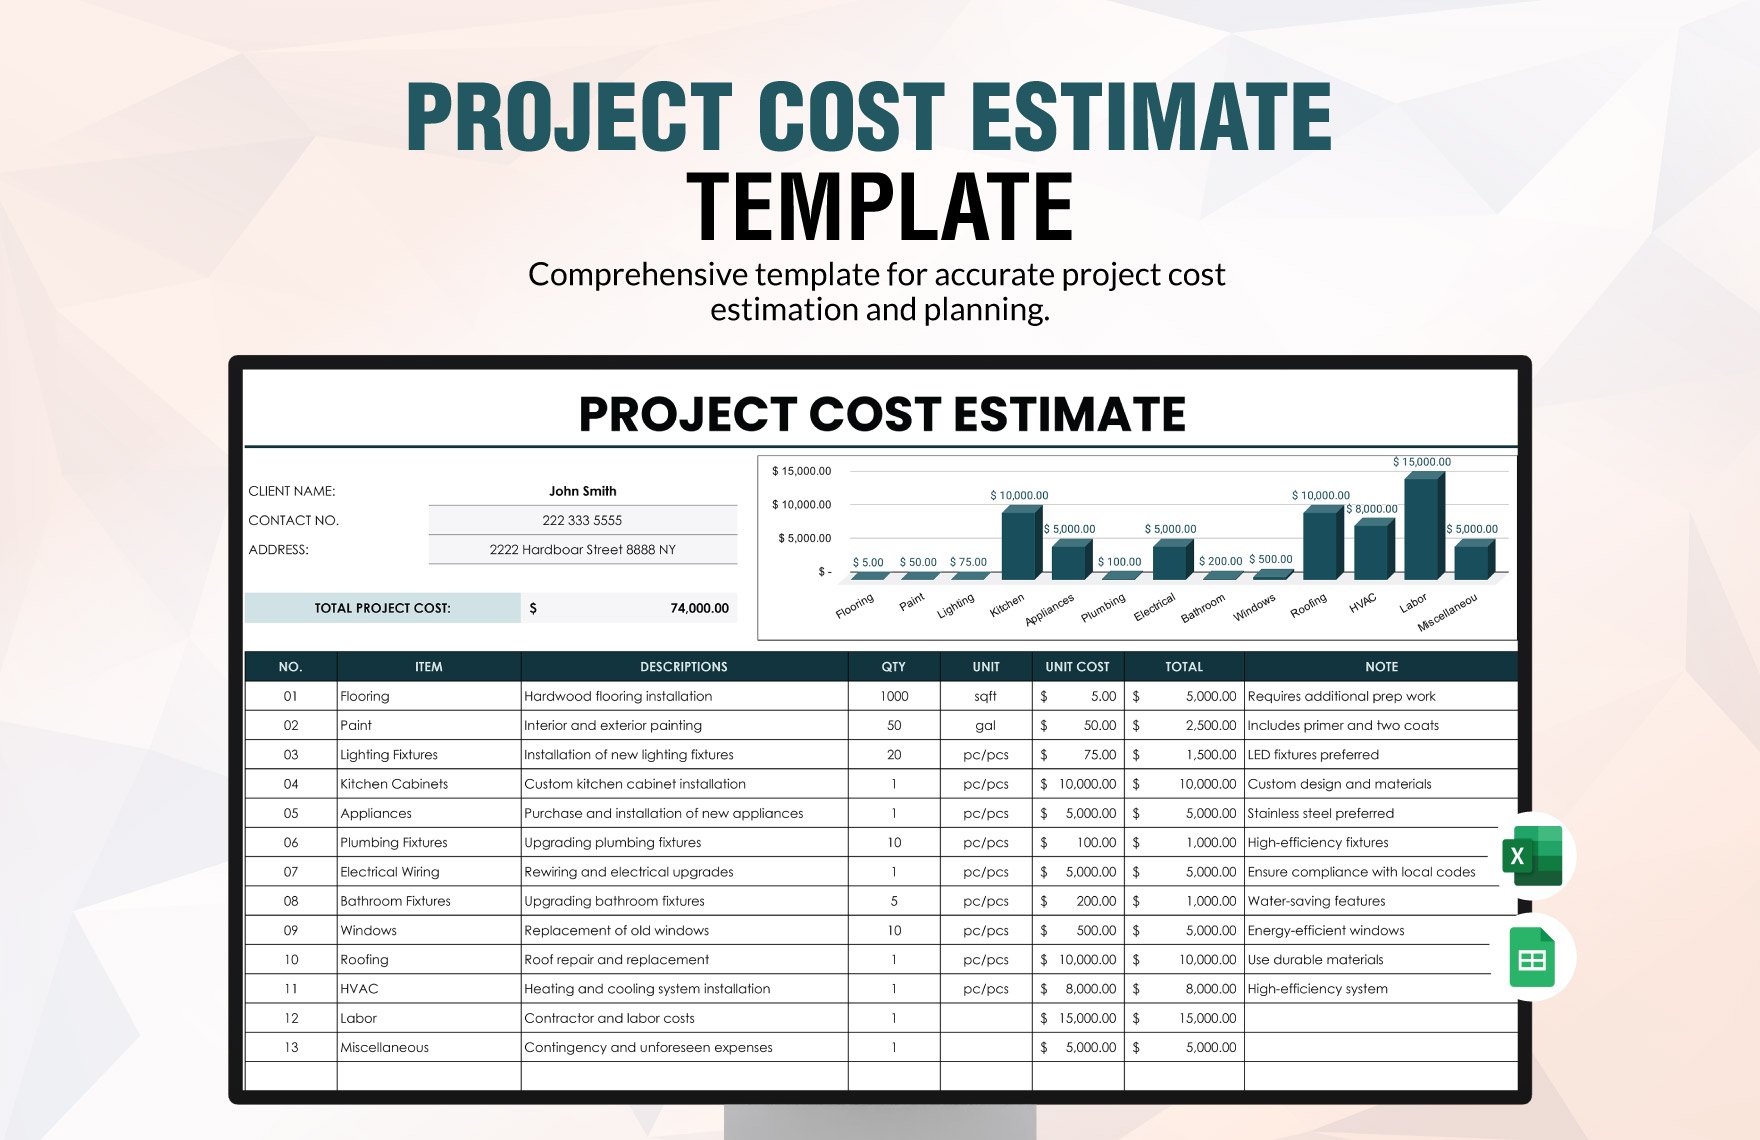 Project Cost Estimate Template in Excel, Google Sheets